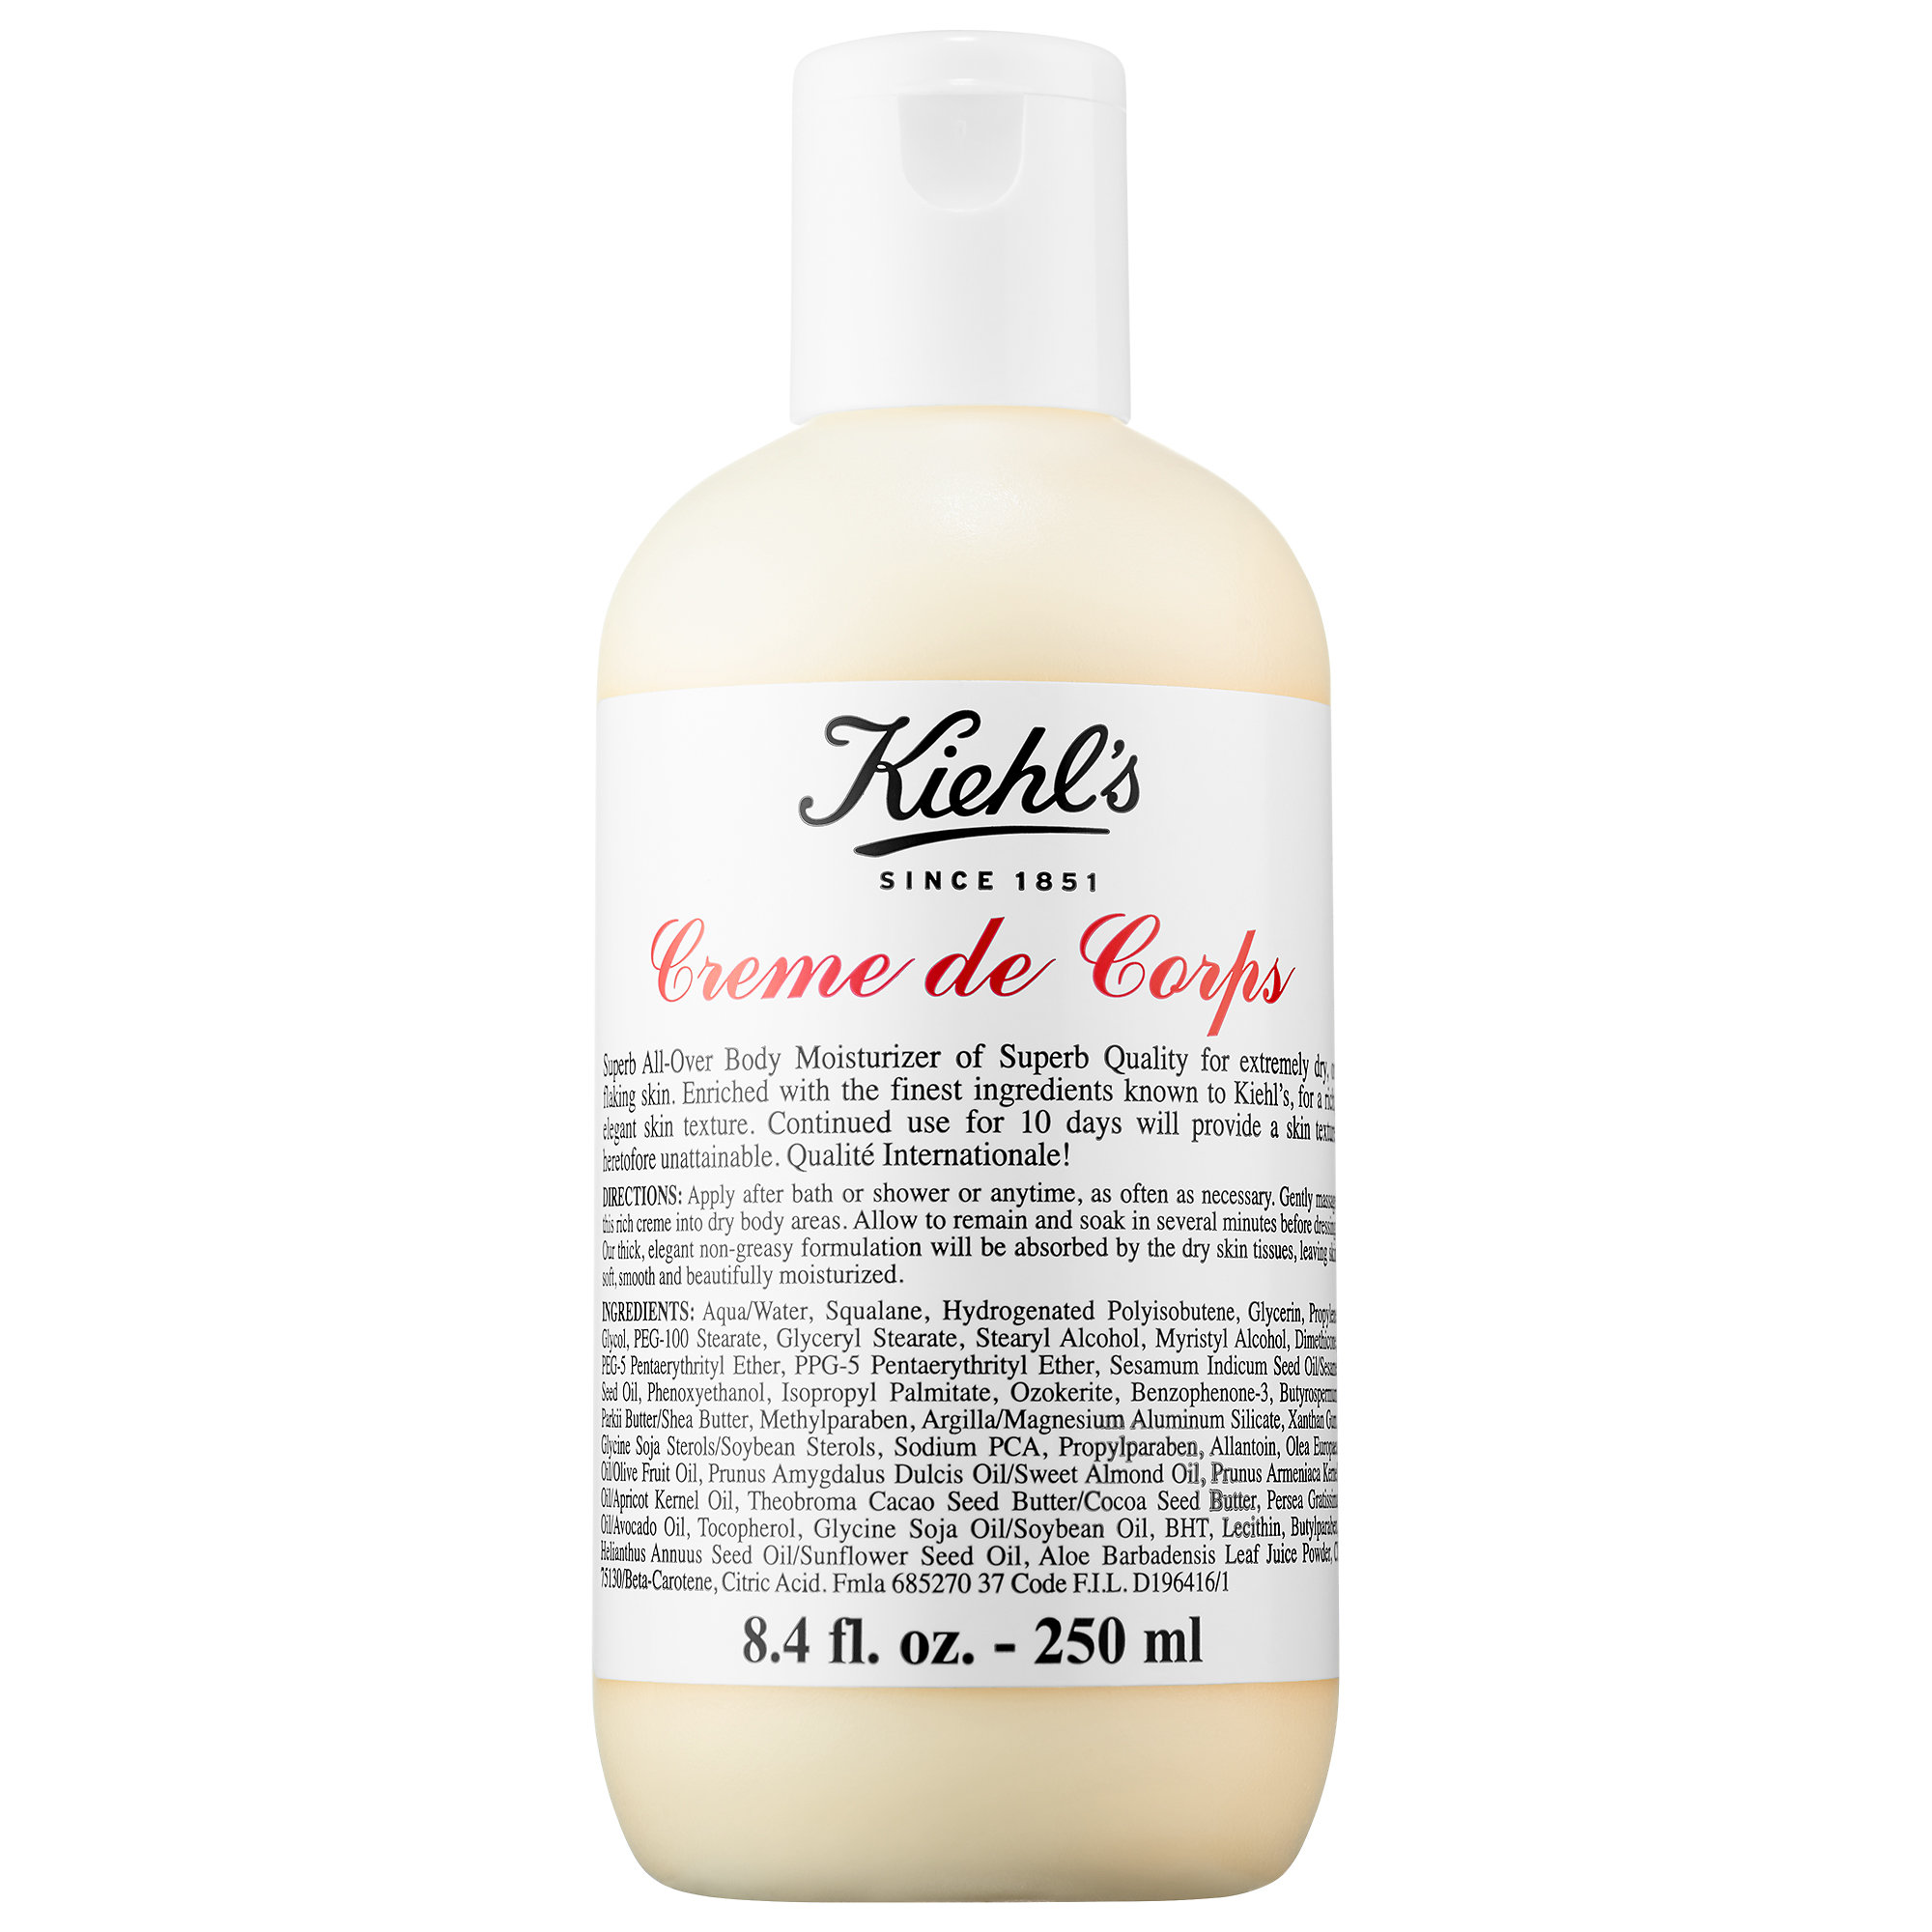 Crème de Corps Hydrating Body Lotion with Squalane by Kiehl's.